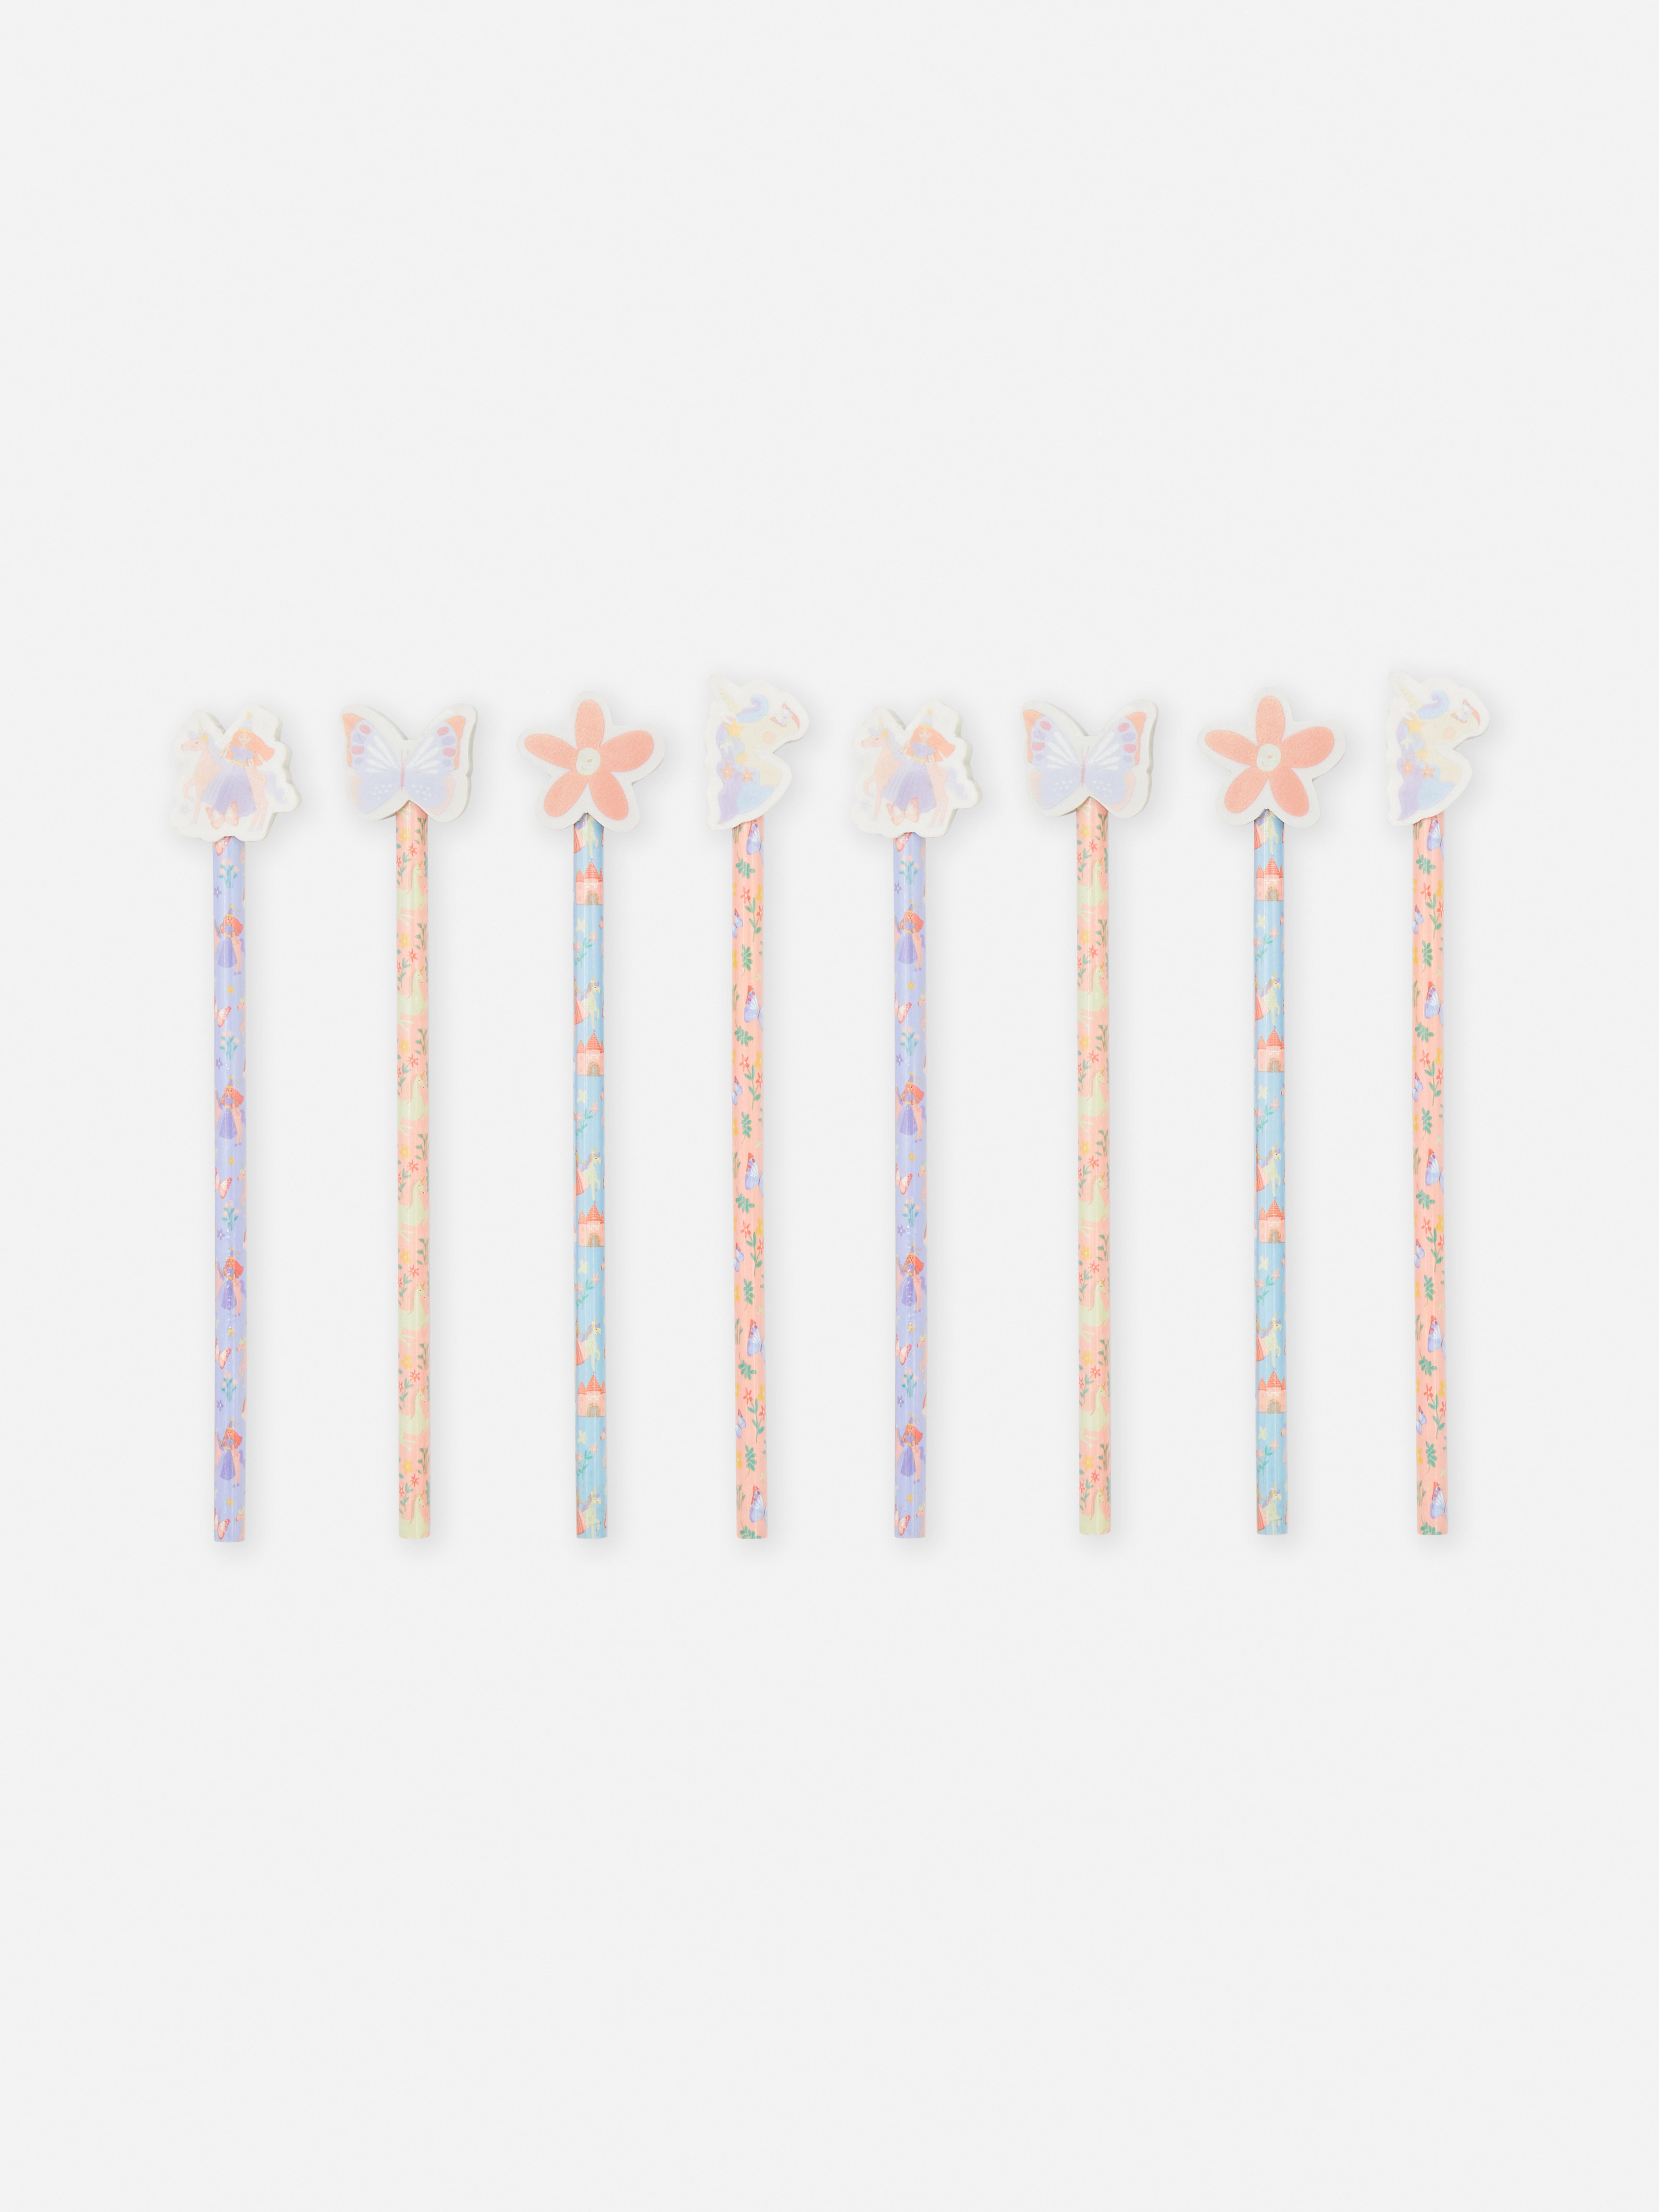 Patterned Pencils and Erasers